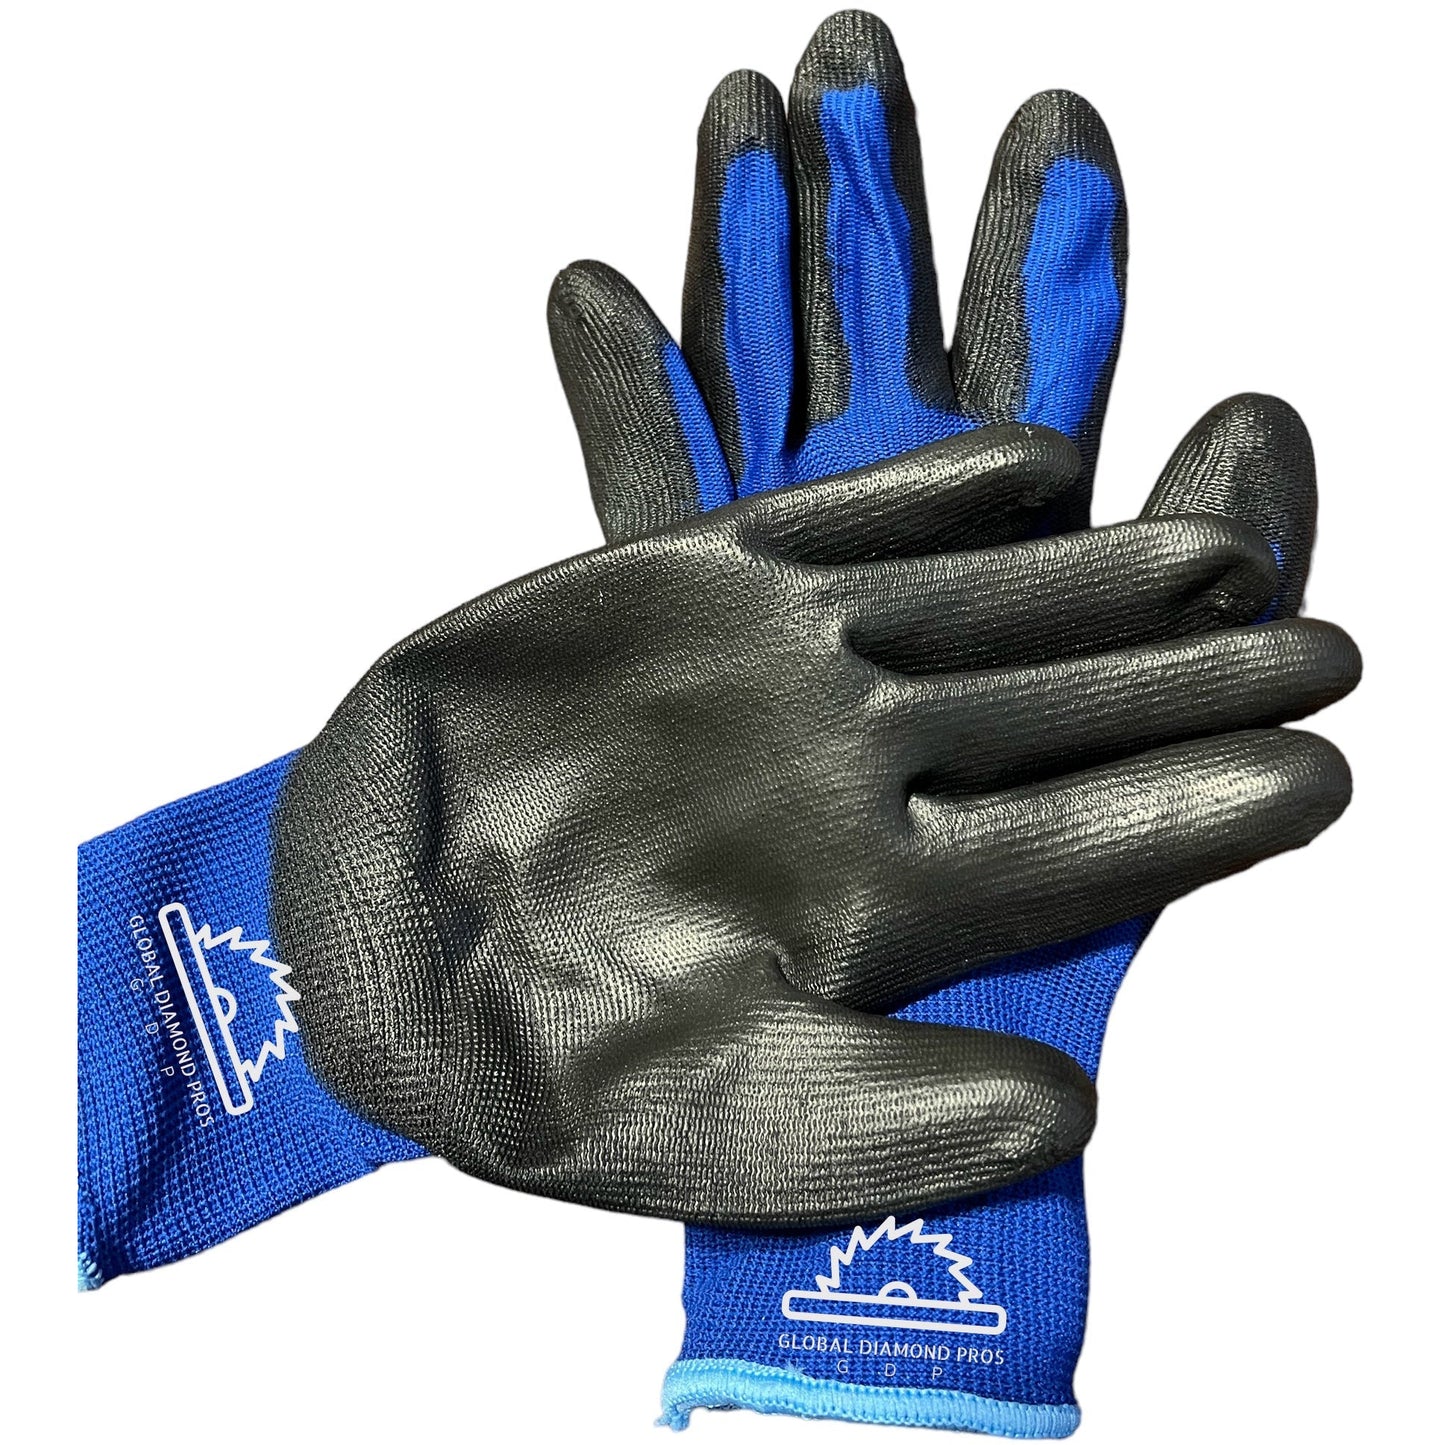 Professional Work Gloves for Construction Masonry Stone - 6 Pack